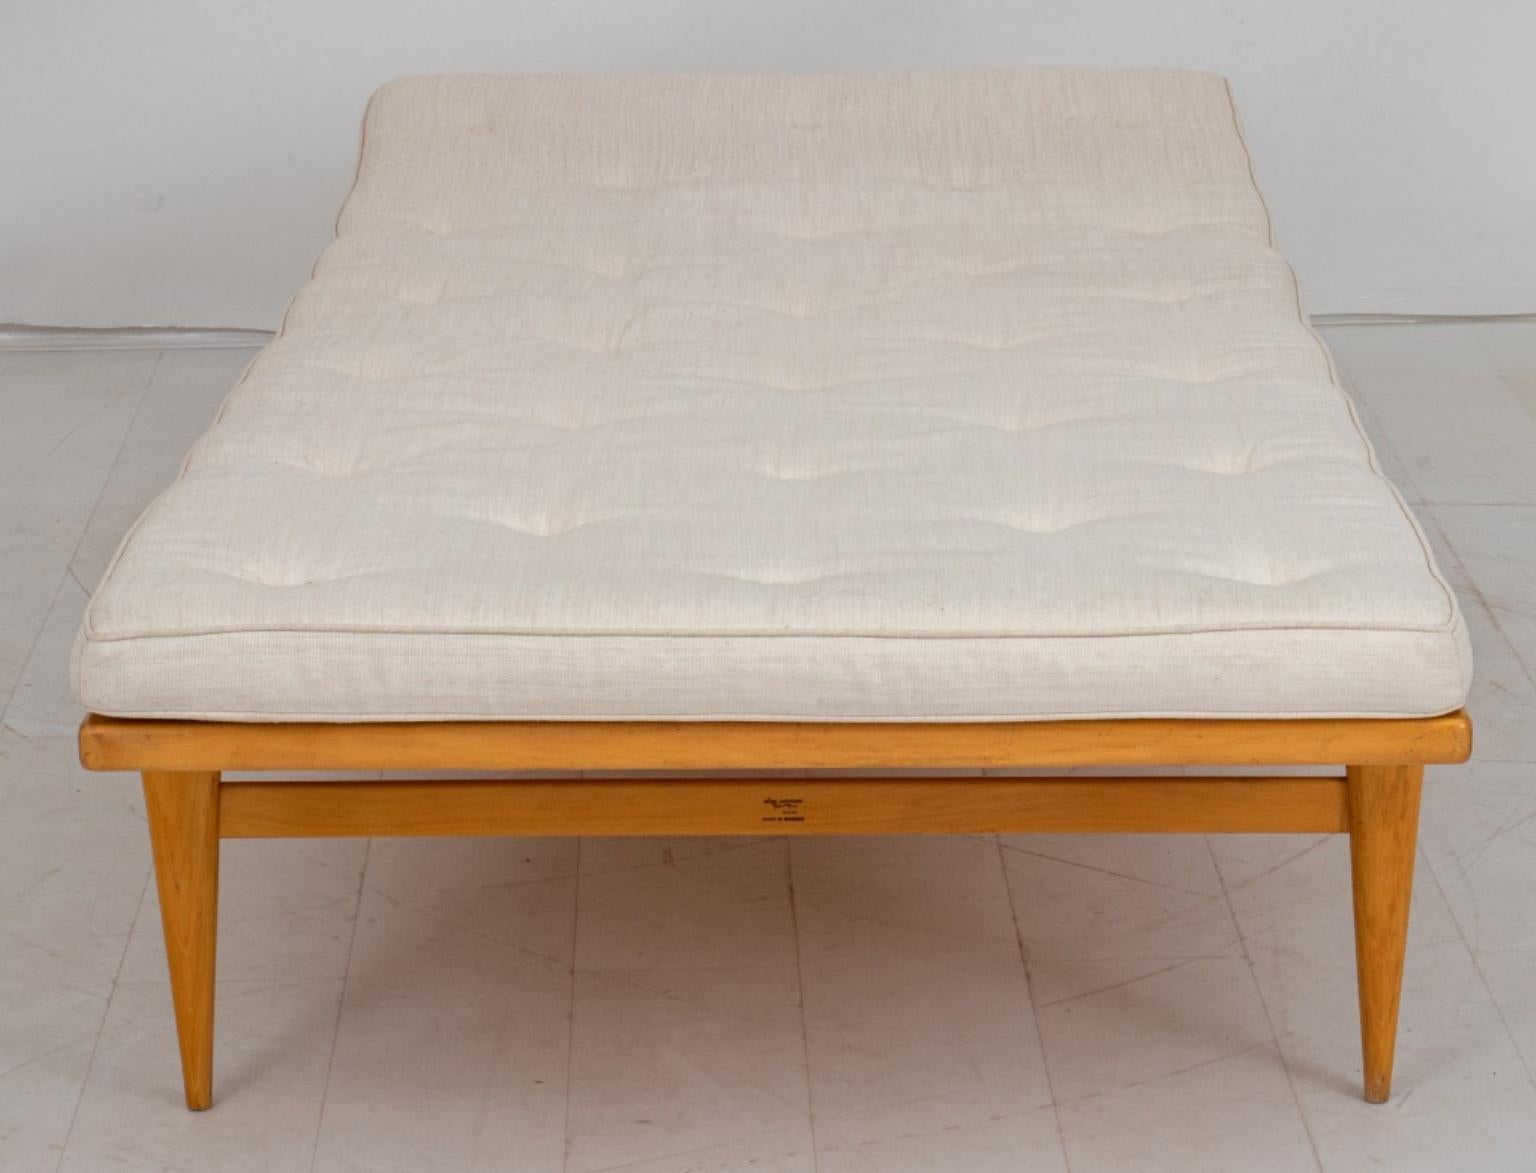 Bruno Mattheson (Swedish, 1907-1988) a ‘T-303’ ‘Berlin daybed’ in beech wood, 1950s, rectangular with one elevated end on four tapering columnar legs, with upholstered mattress intact and covered in natural linen weave.
Provenance: Property From a